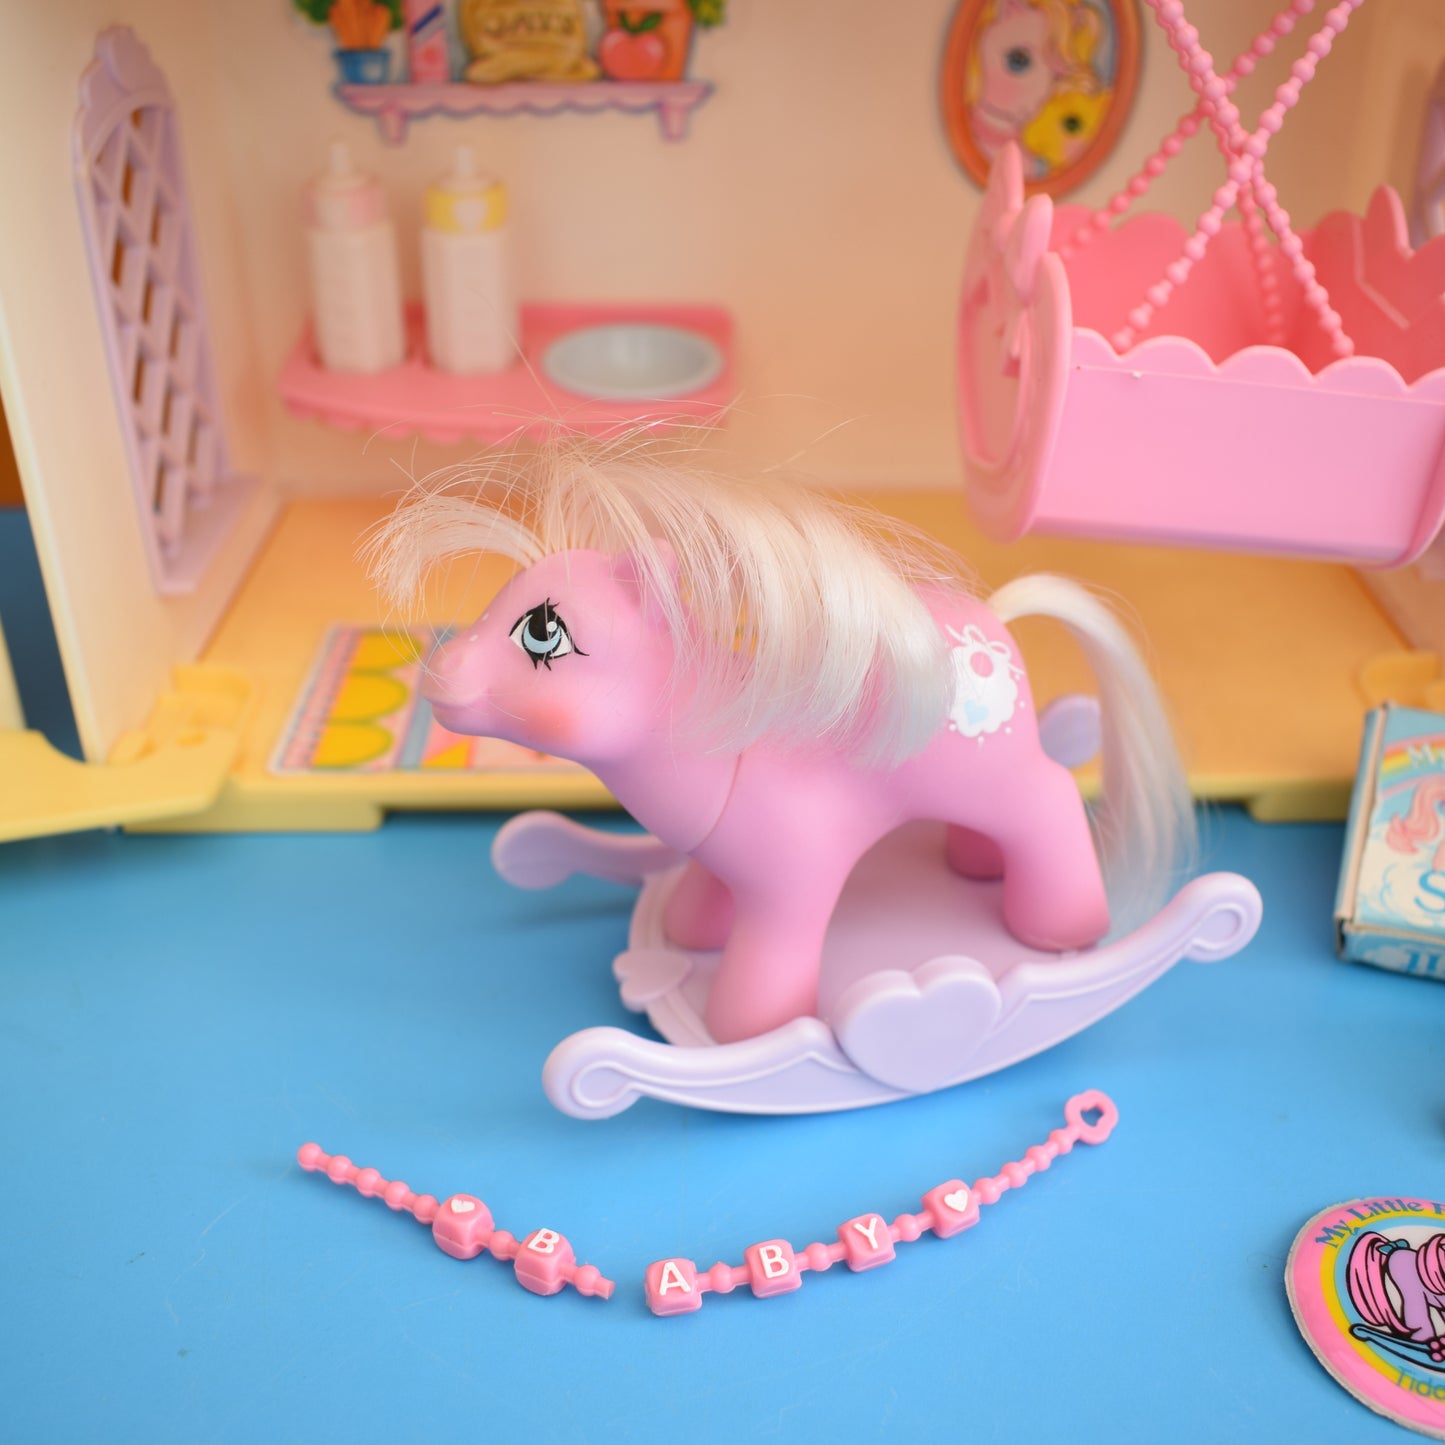 Vintage 1980s My Little Pony Lullaby Nursery- Boxed